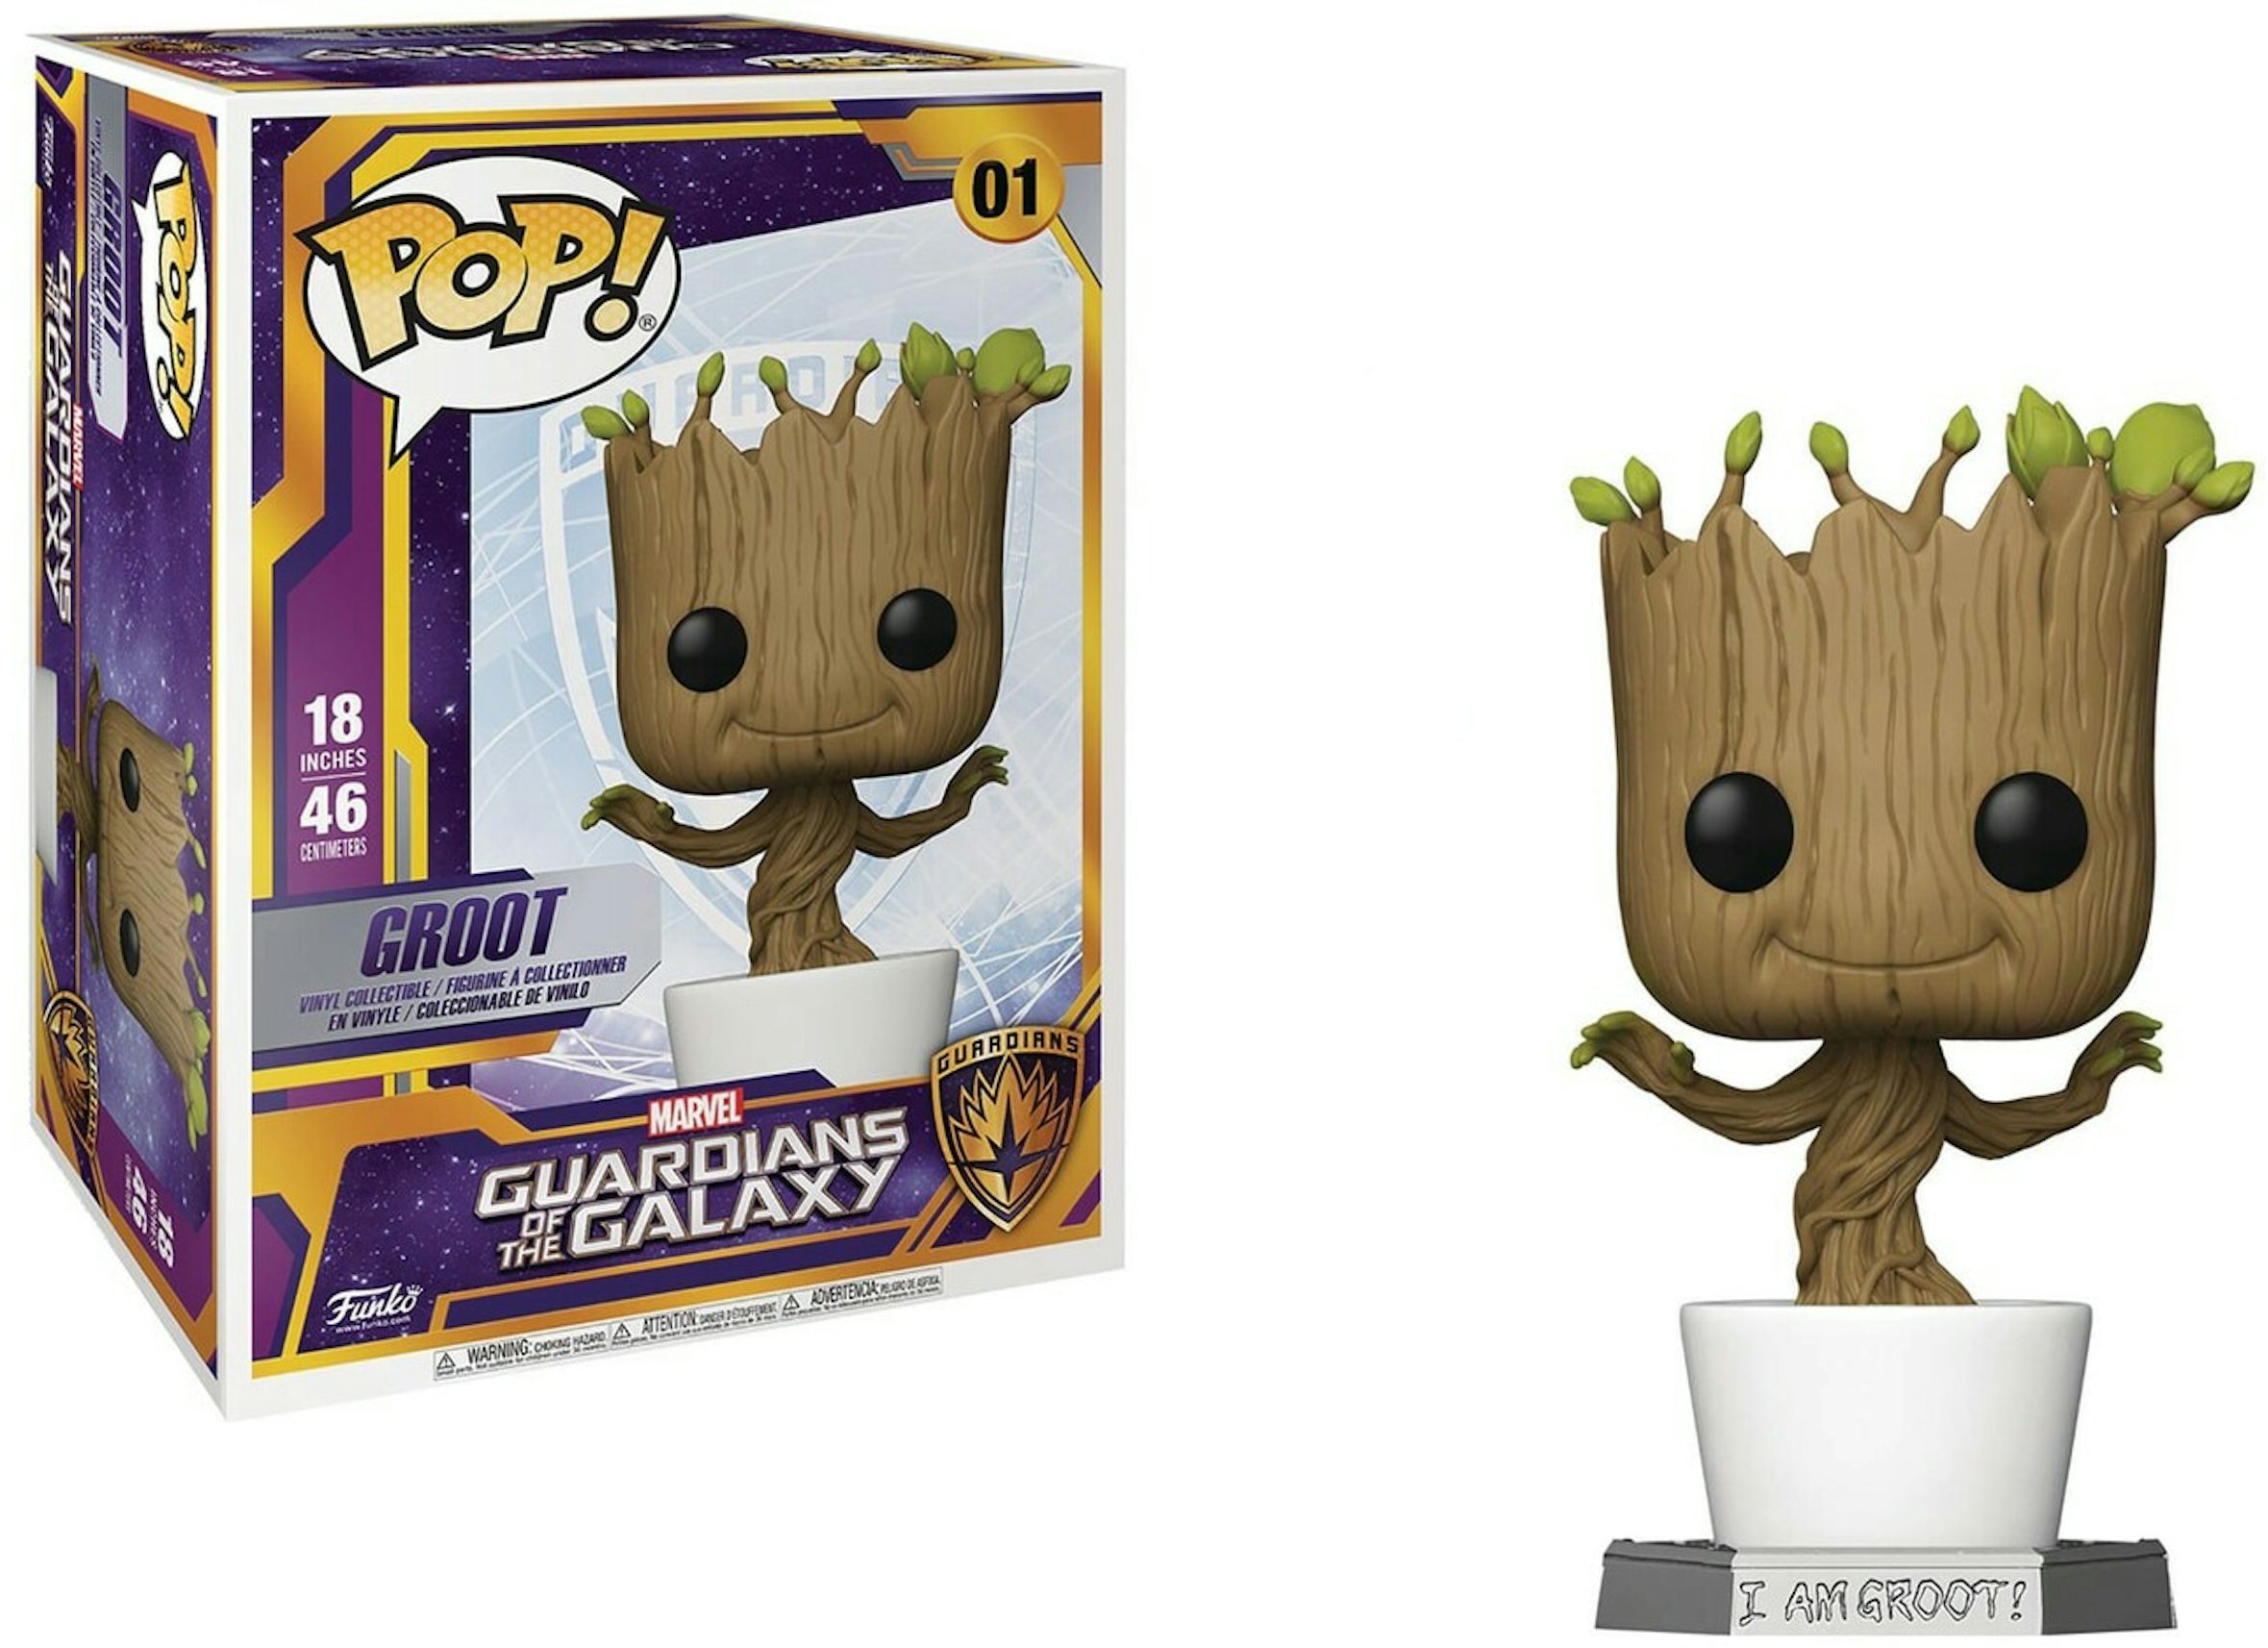 https://images.stockx.com/images/Funko-Pop-Marvel-Guardians-of-the-Galaxy-Groot-18-Inch-Figure-01.jpg?fit=fill&bg=FFFFFF&w=1200&h=857&fm=jpg&auto=compress&dpr=2&trim=color&updated_at=1607122910&q=60